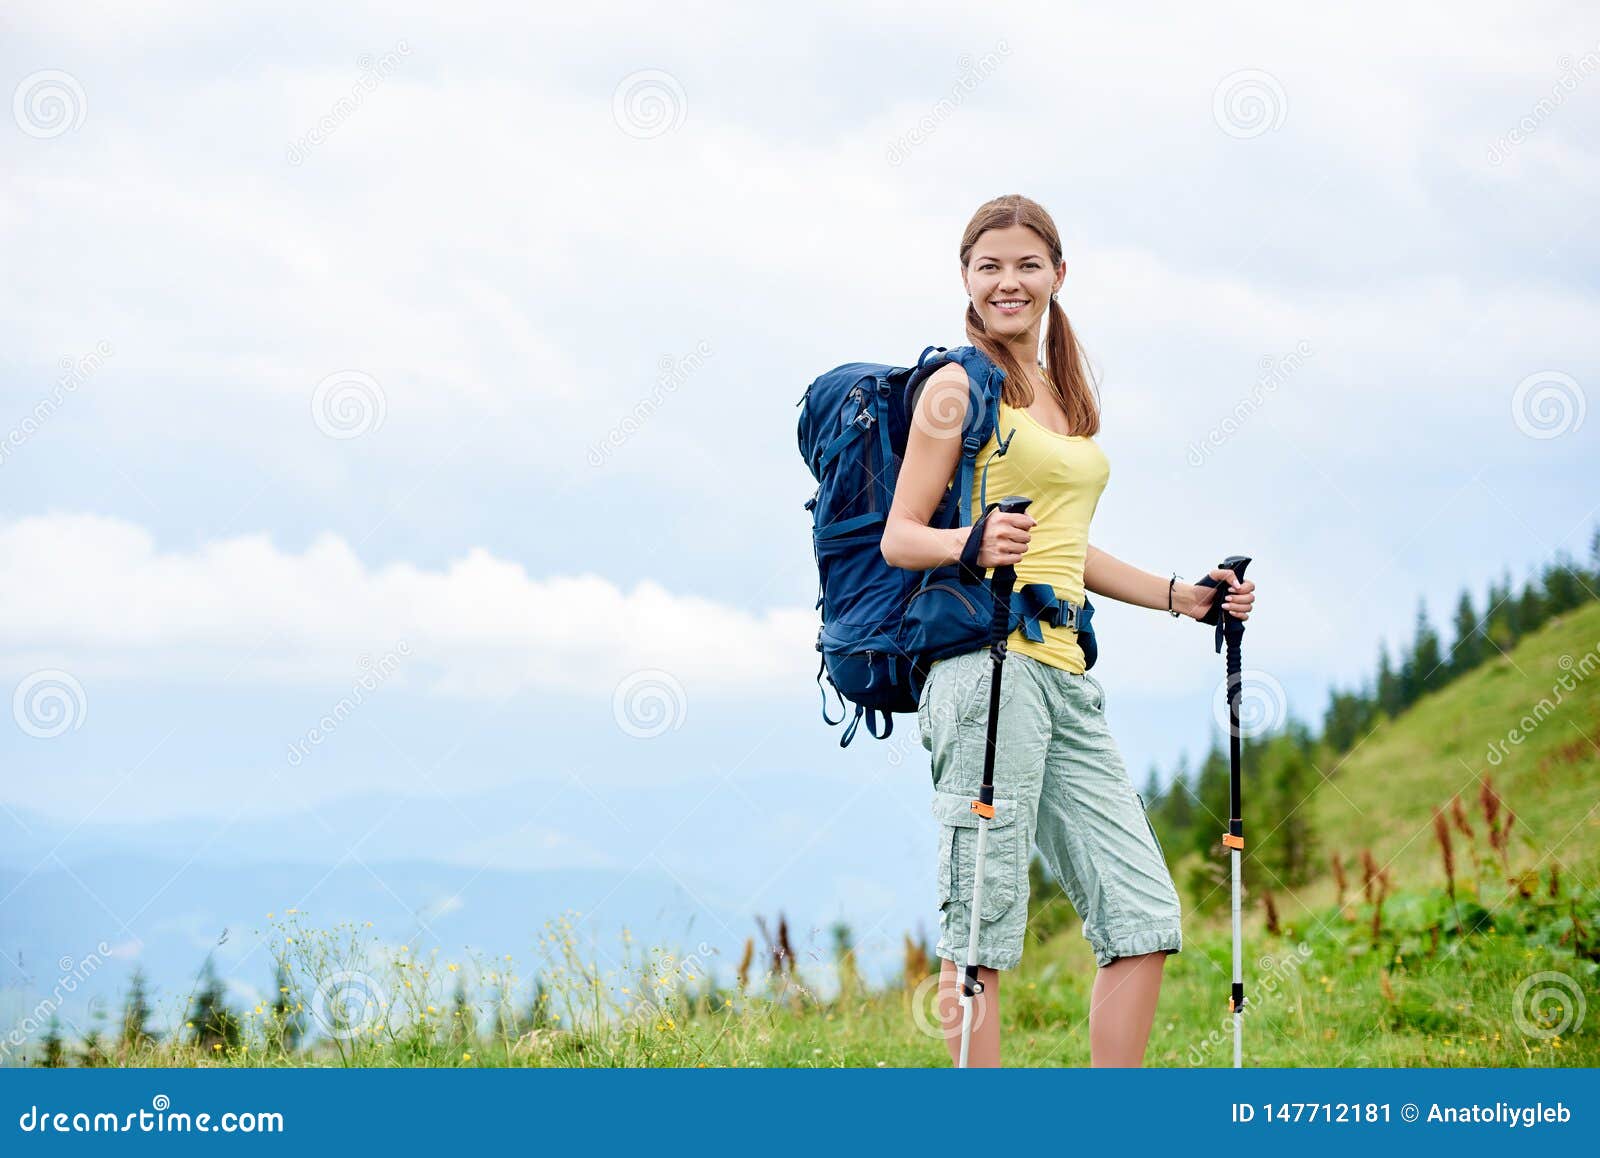 Woman Hiker Hiking On Grassy Hill, Wearing Backpack, Using 